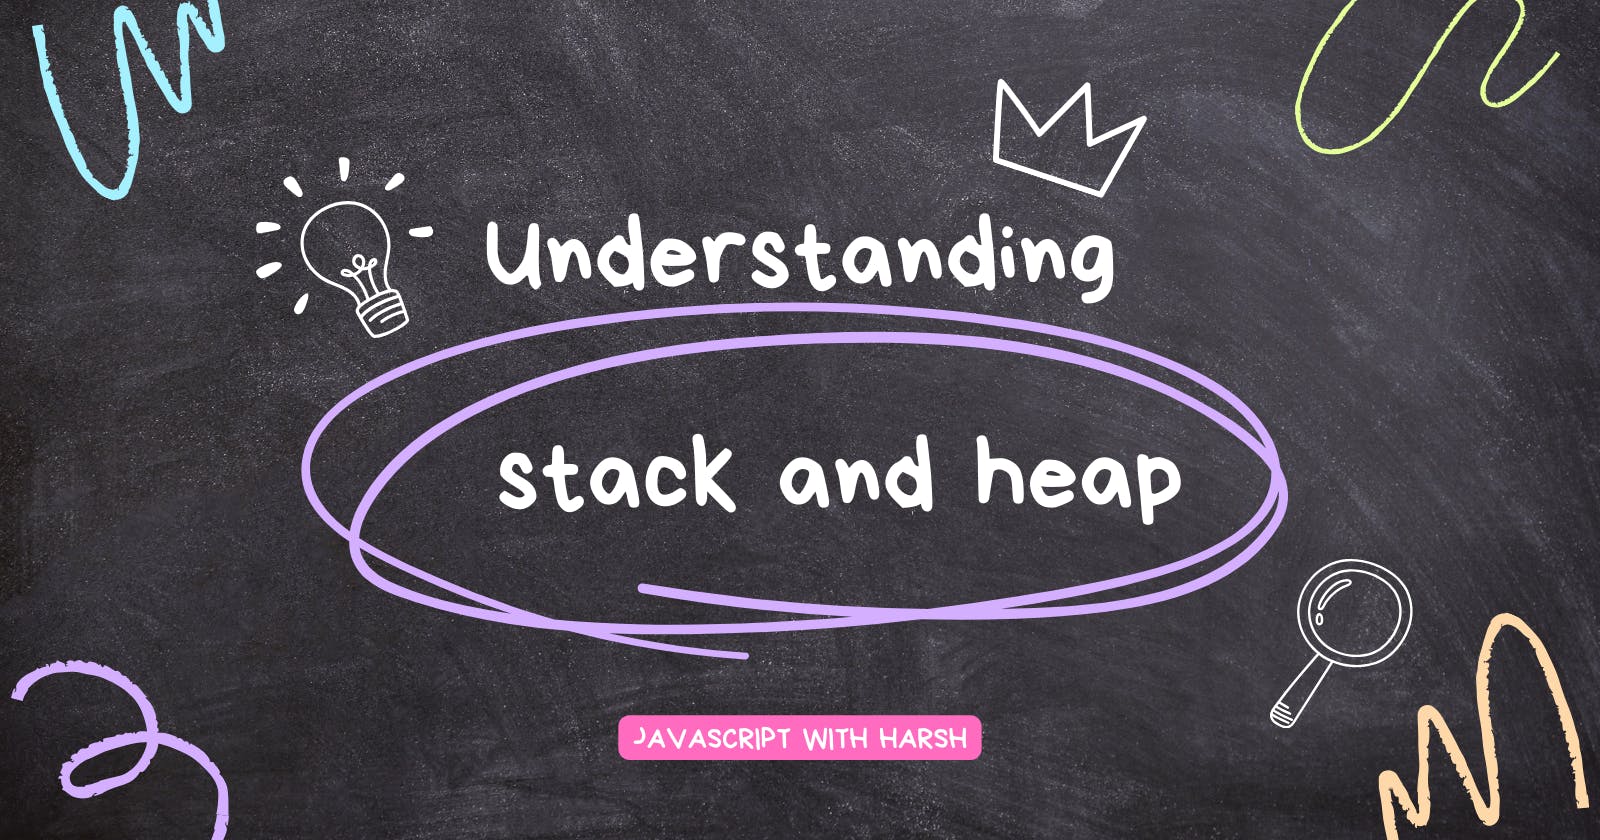 Stack and heap in javascript